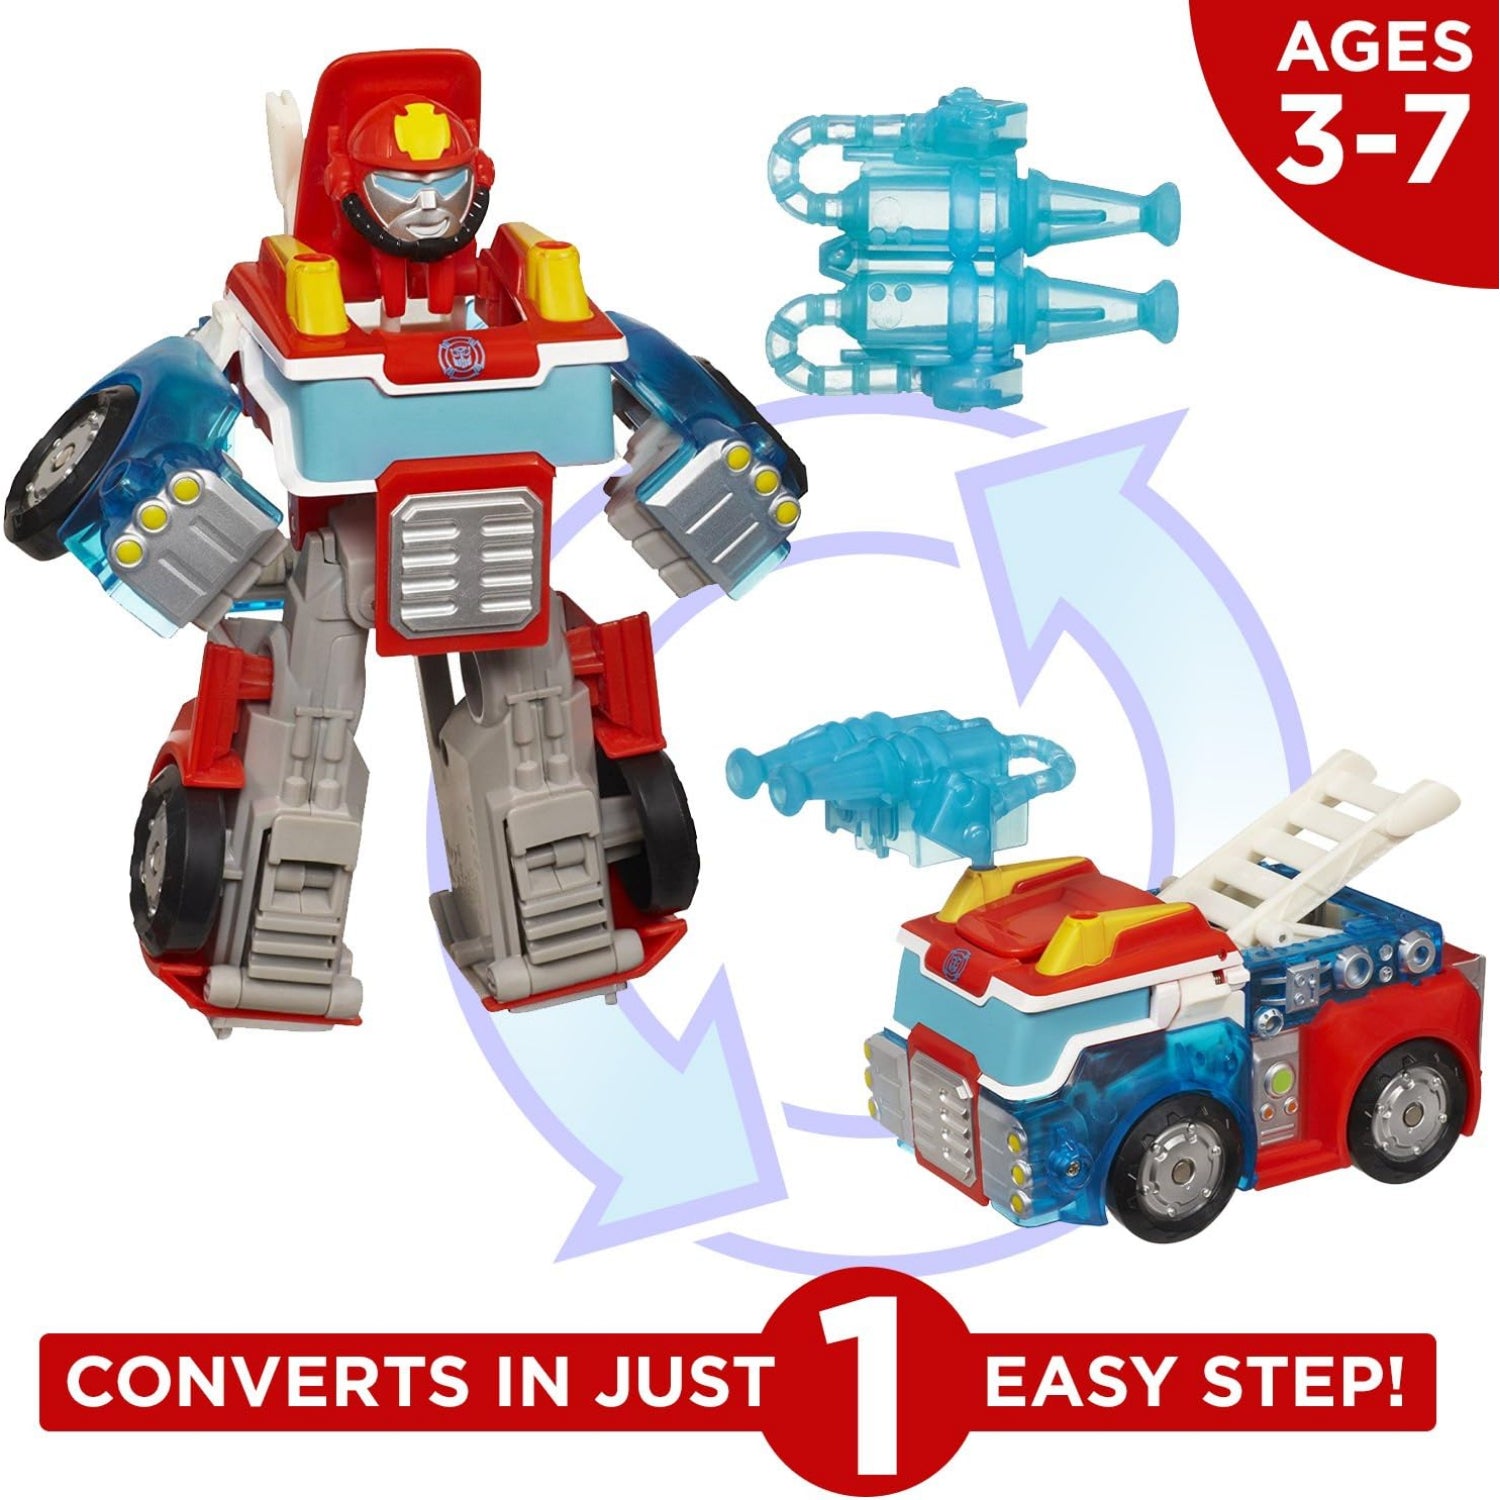 Playskool Transformers Heroes Rescue Bots Energize Heatwave The Fire Bot Converting Toy Robot Action